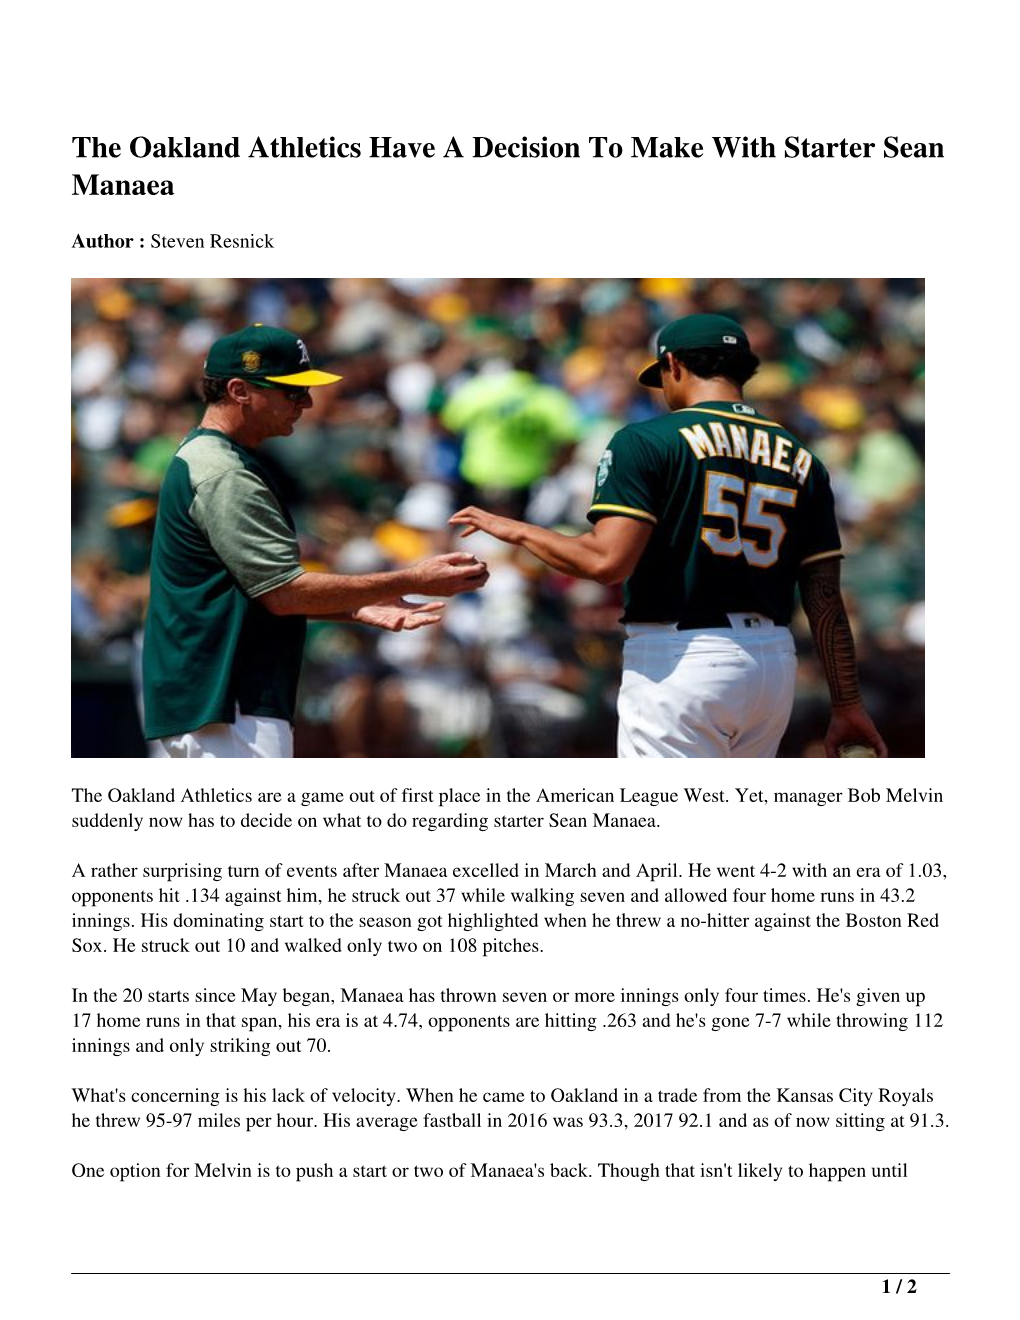 The Oakland Athletics Have a Decision to Make with Starter Sean Manaea